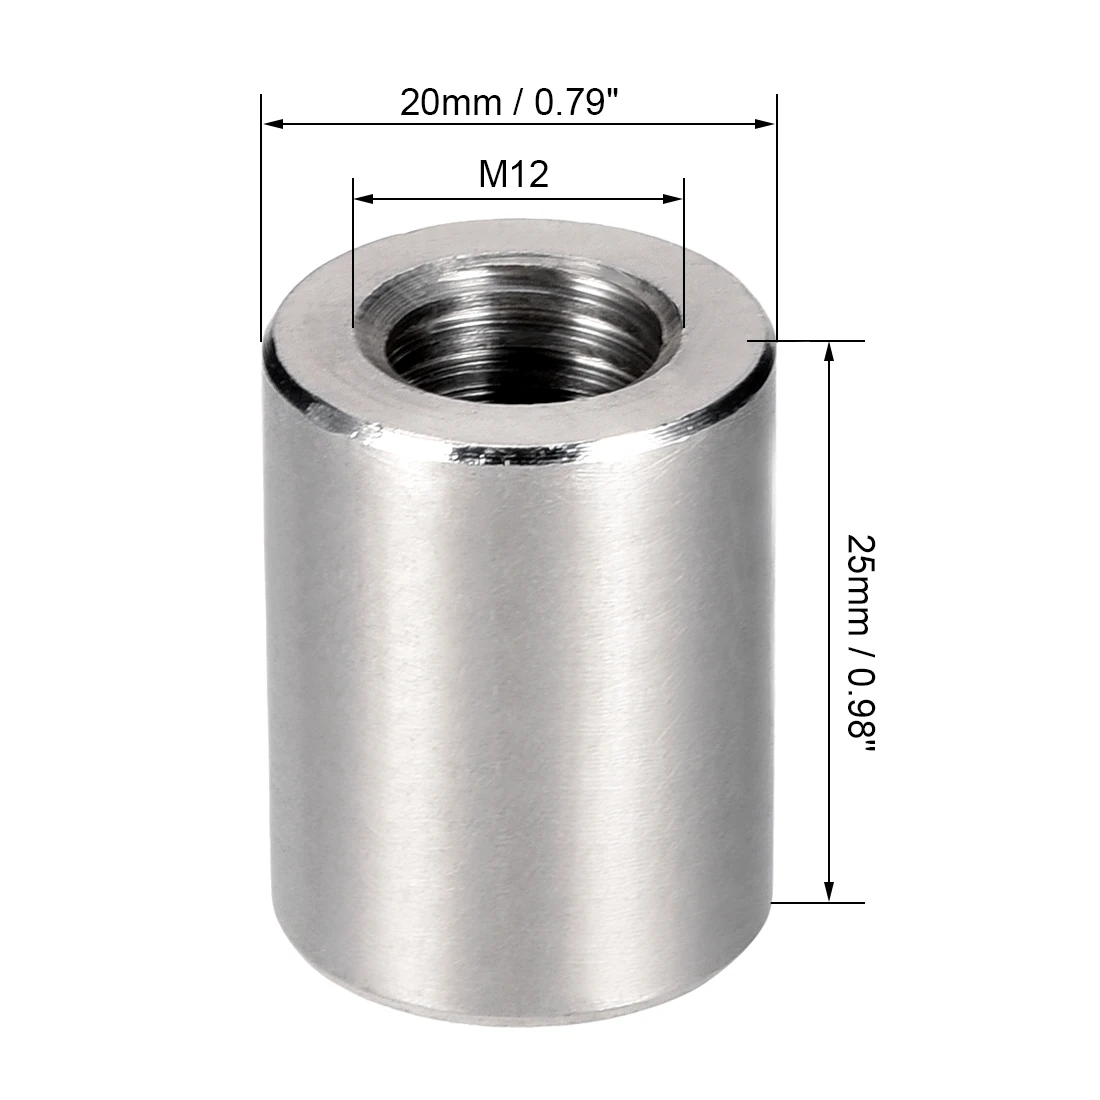 M6 M8 M10 M12 M14 M16 M18 M20 Hex Round Long Connector Joint Nut Coupling Nuts 